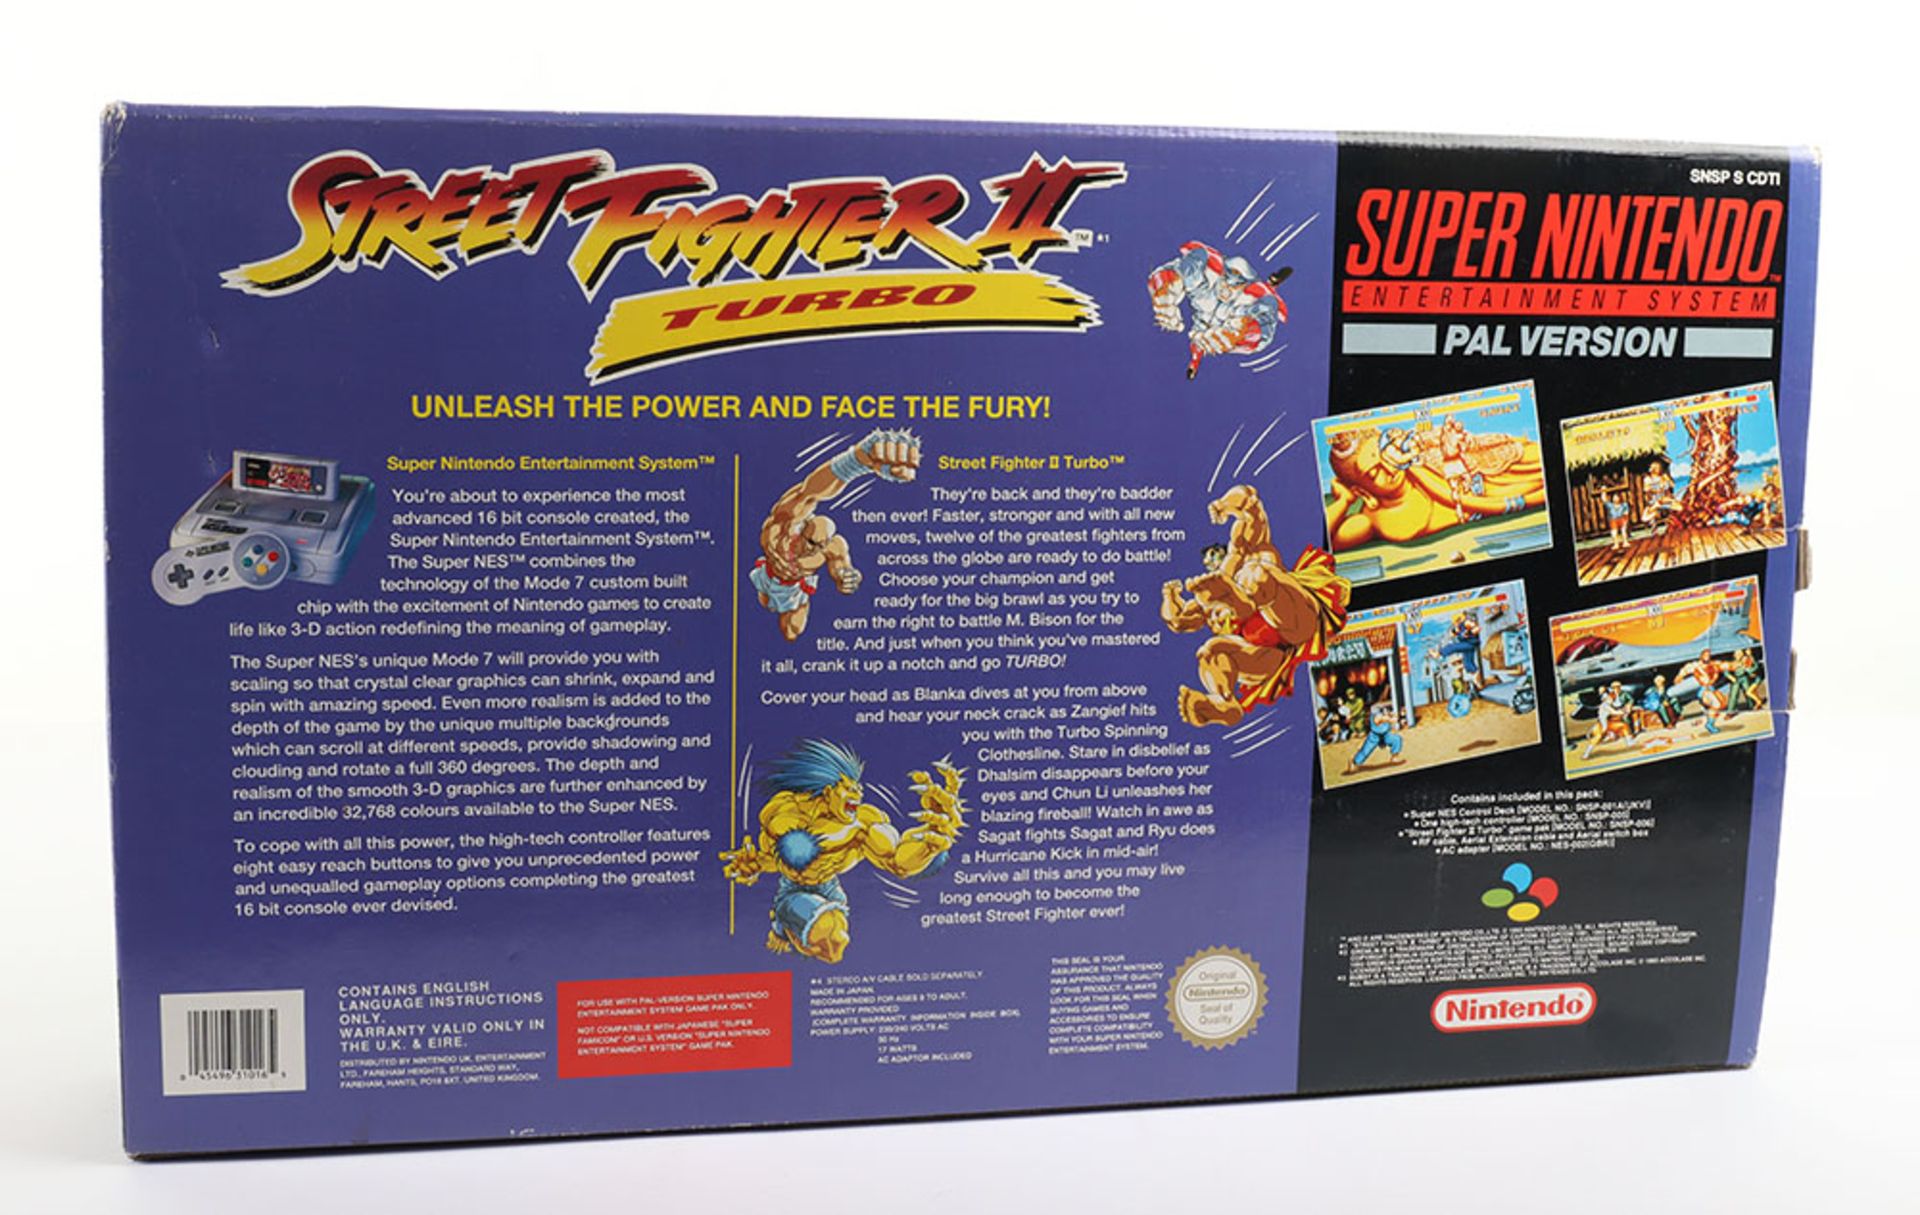 Super Nintendo Street Fighter 2 Turbo edition boxed - Image 3 of 11